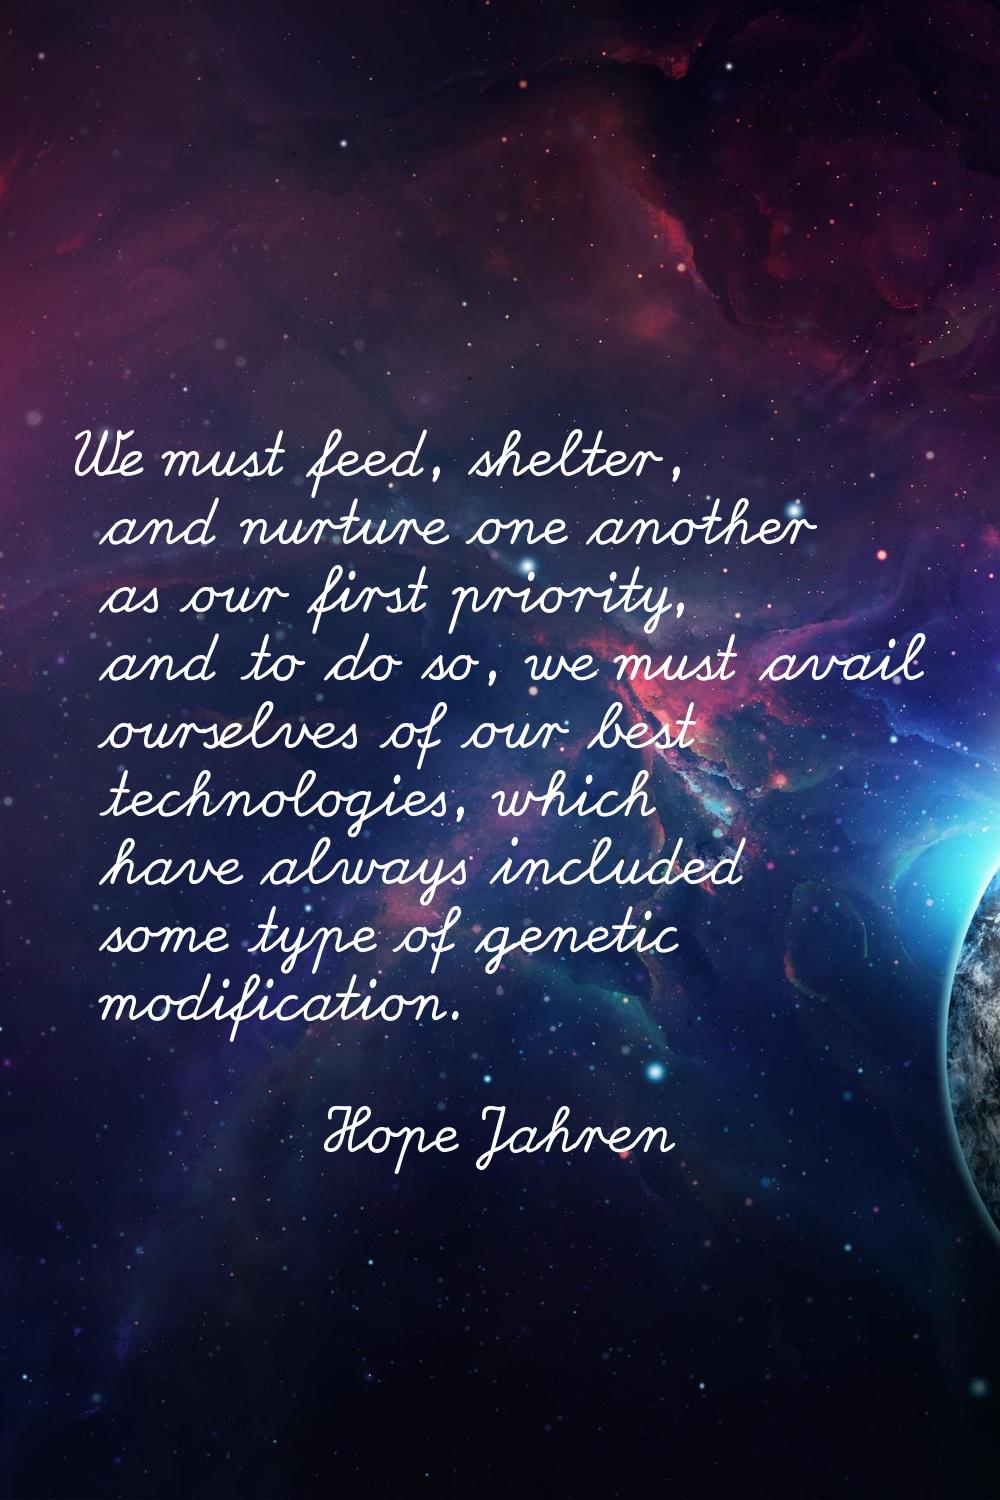 We must feed, shelter, and nurture one another as our first priority, and to do so, we must avail o